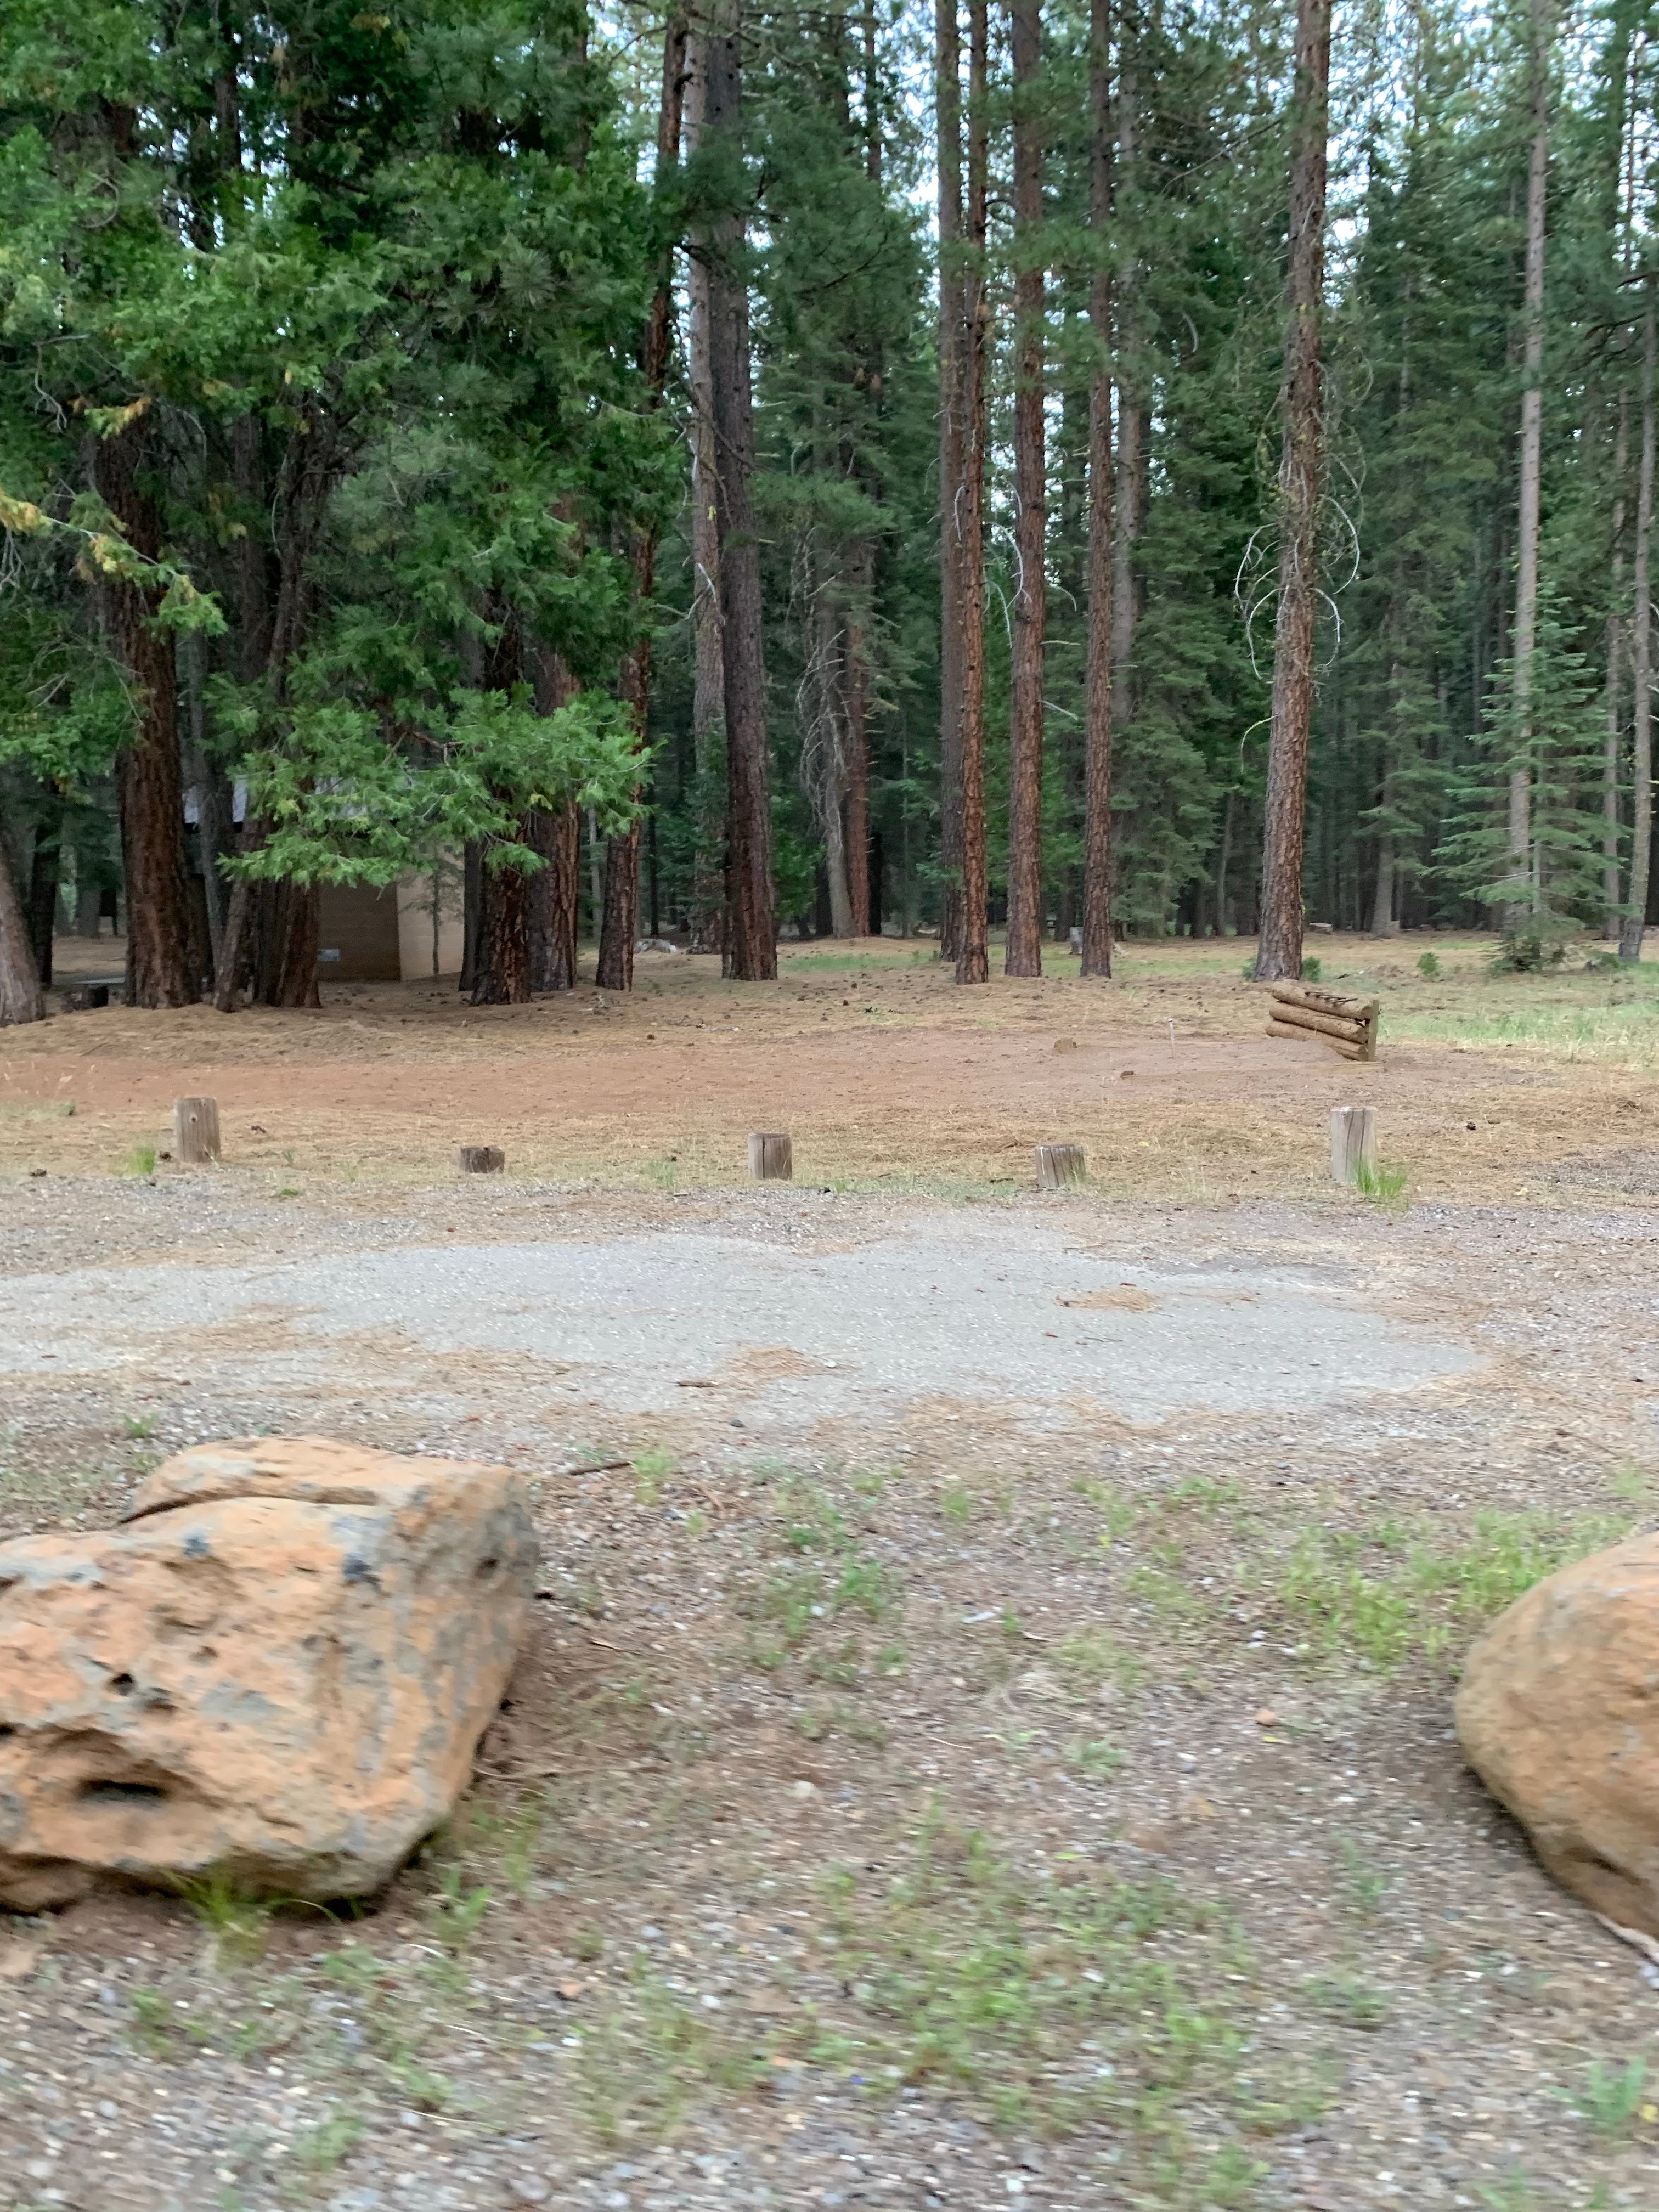 Camper submitted image from PG&E Lake Almanor Area Last Chance Creek Campground - 4